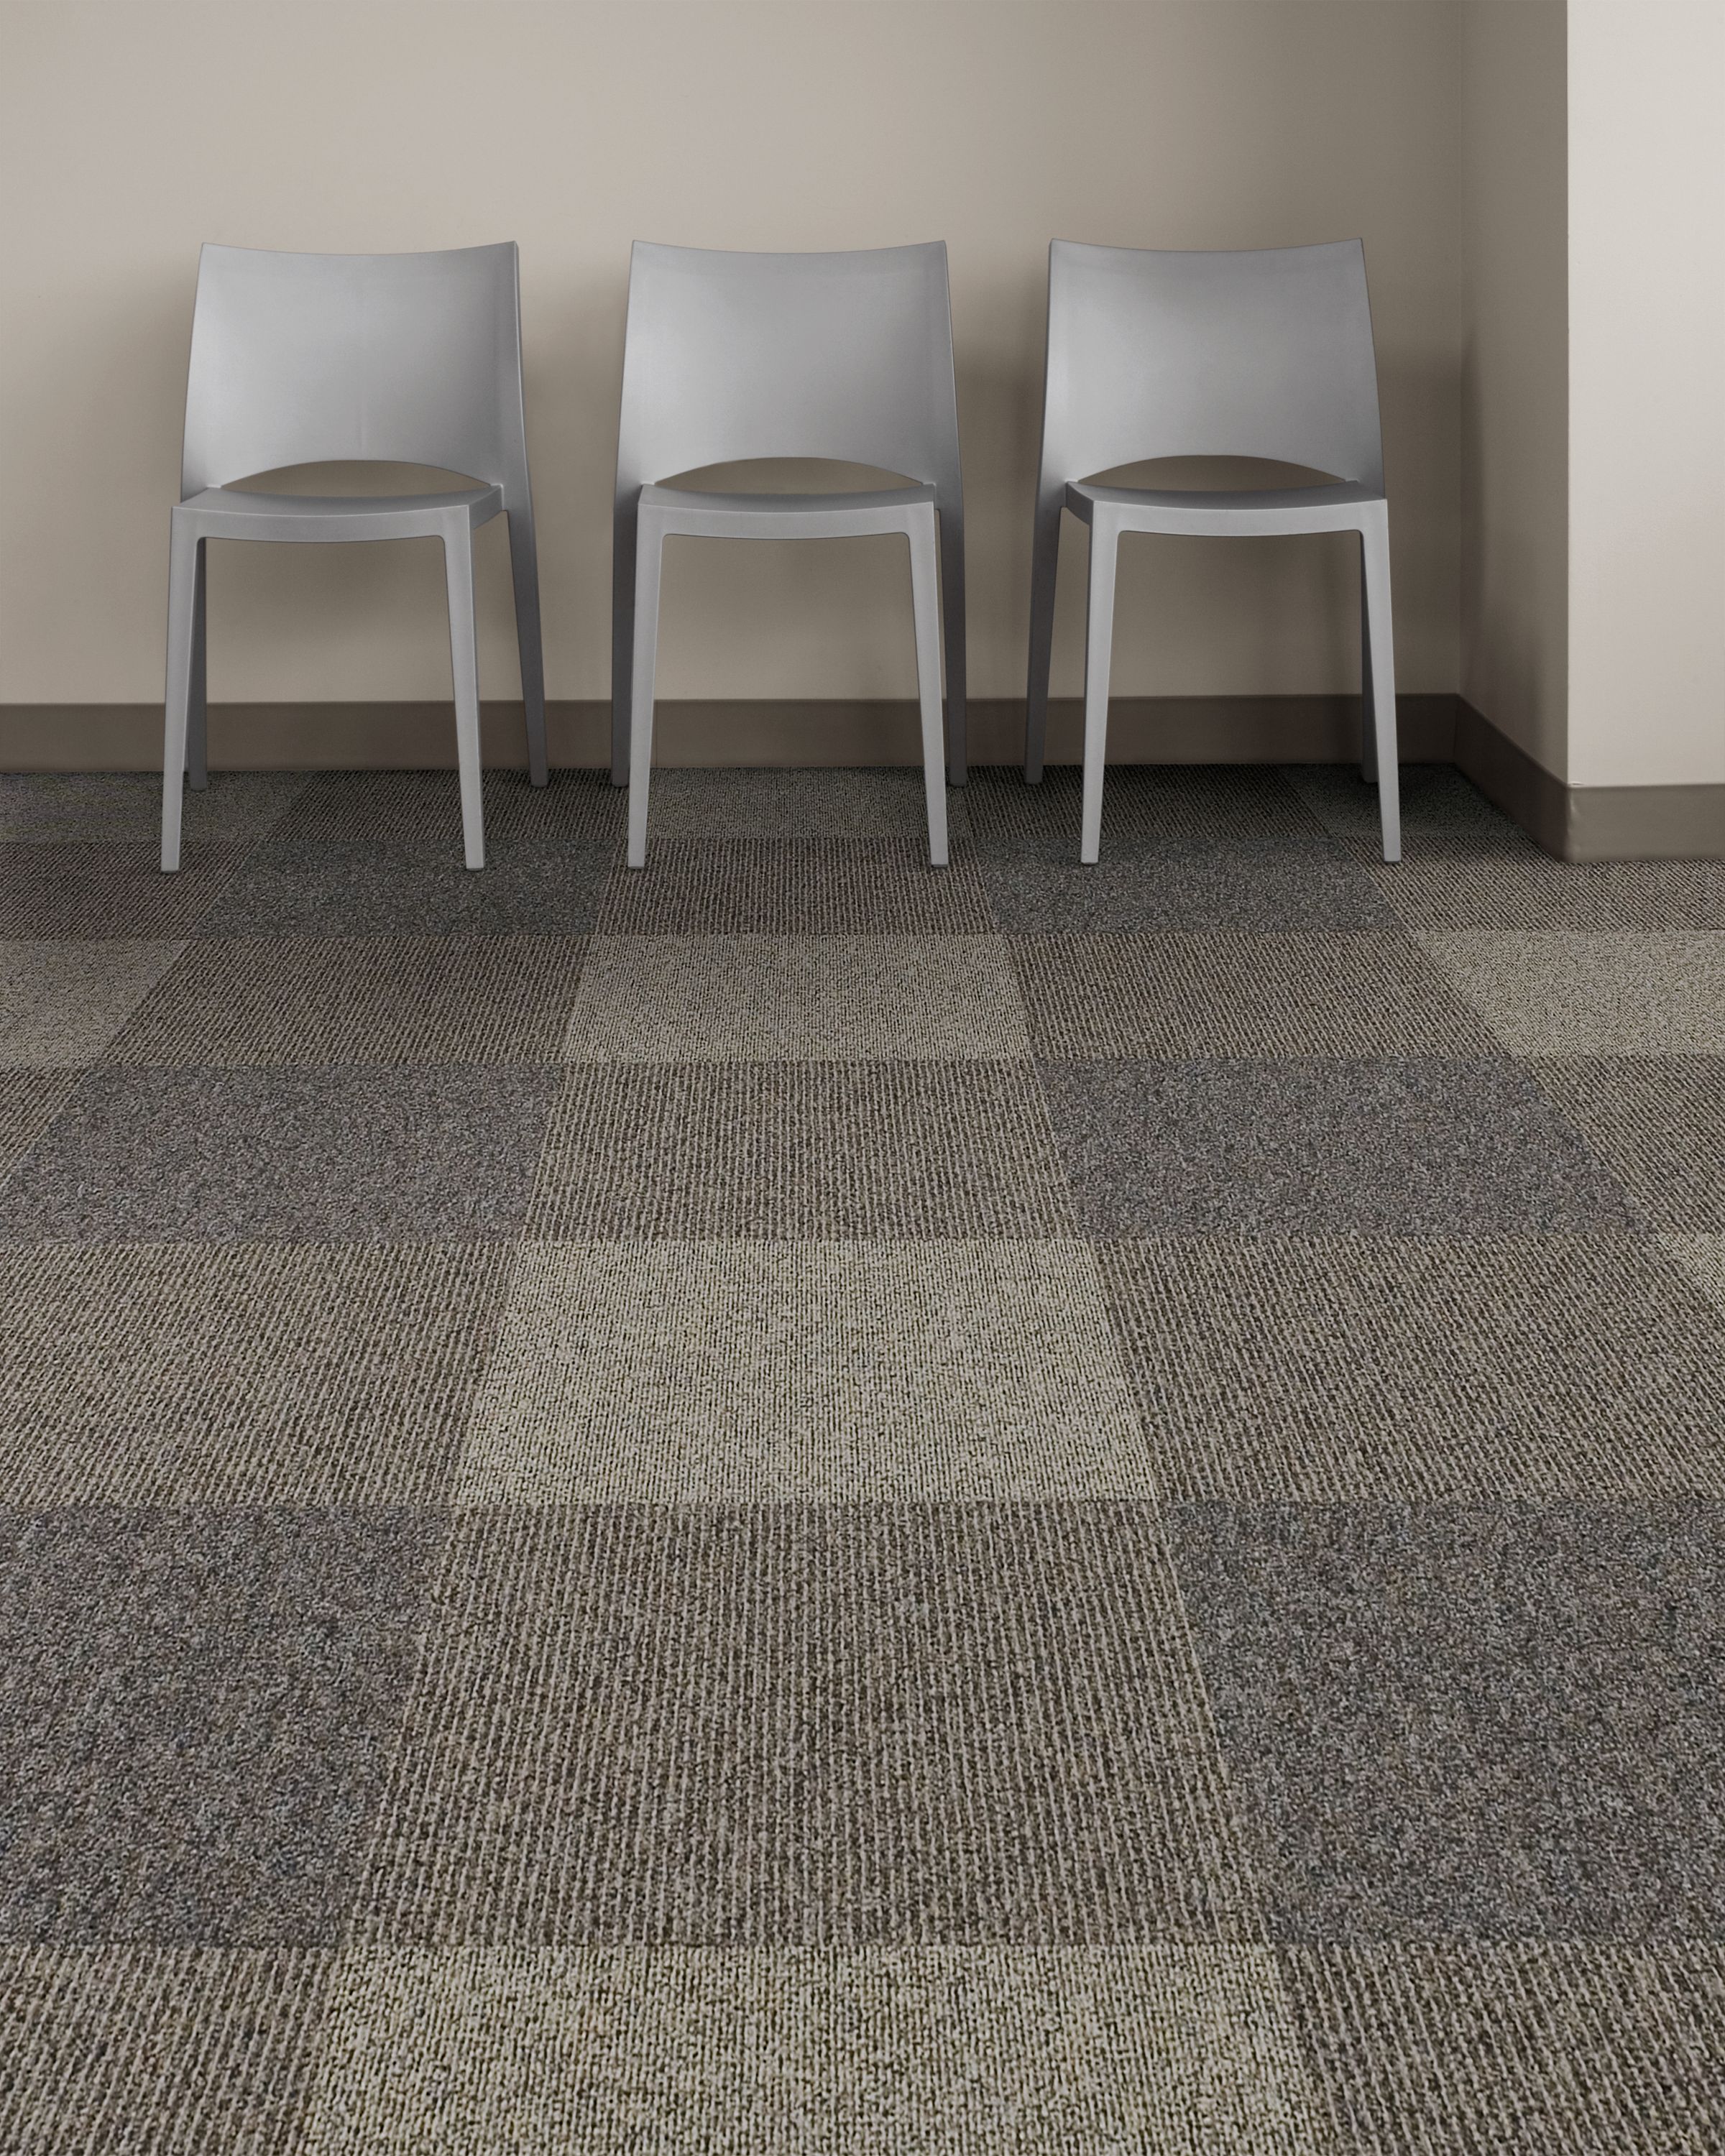 Interface Broomed, Grooved and Brushed carpet tile in room with three chairs imagen número 2